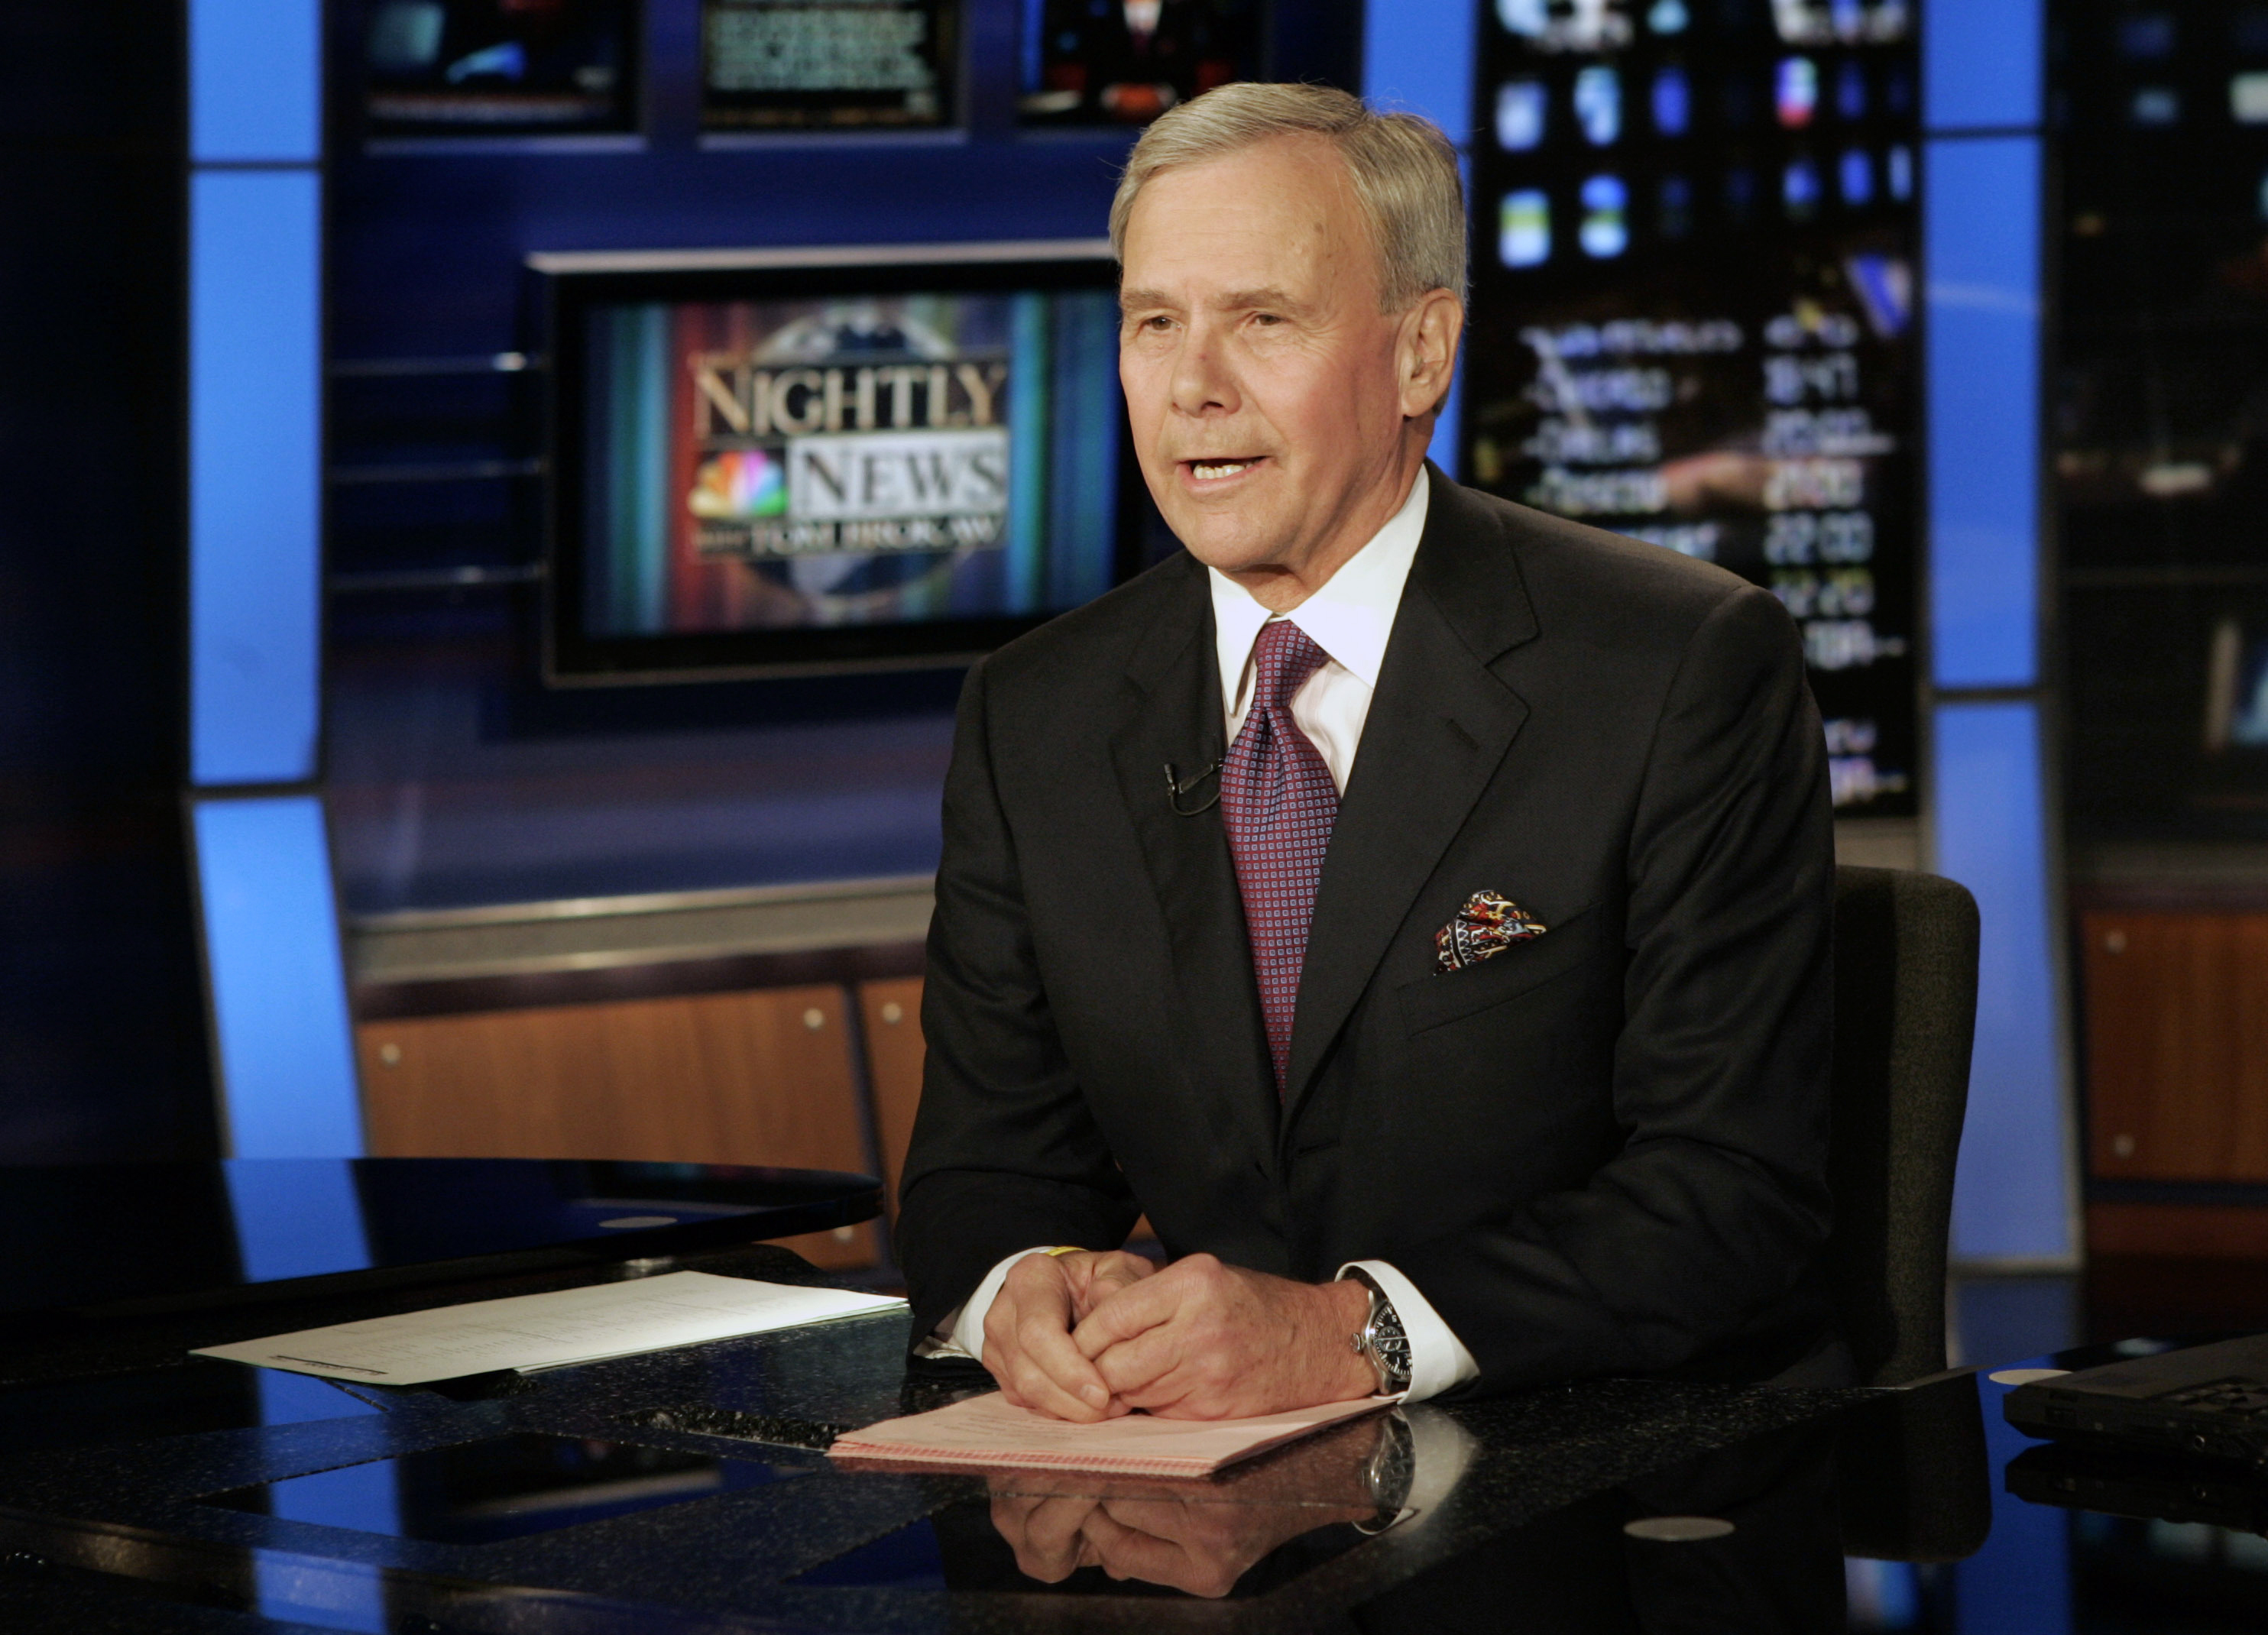 Tom Brokaw is retiring from NBC news after 55 years